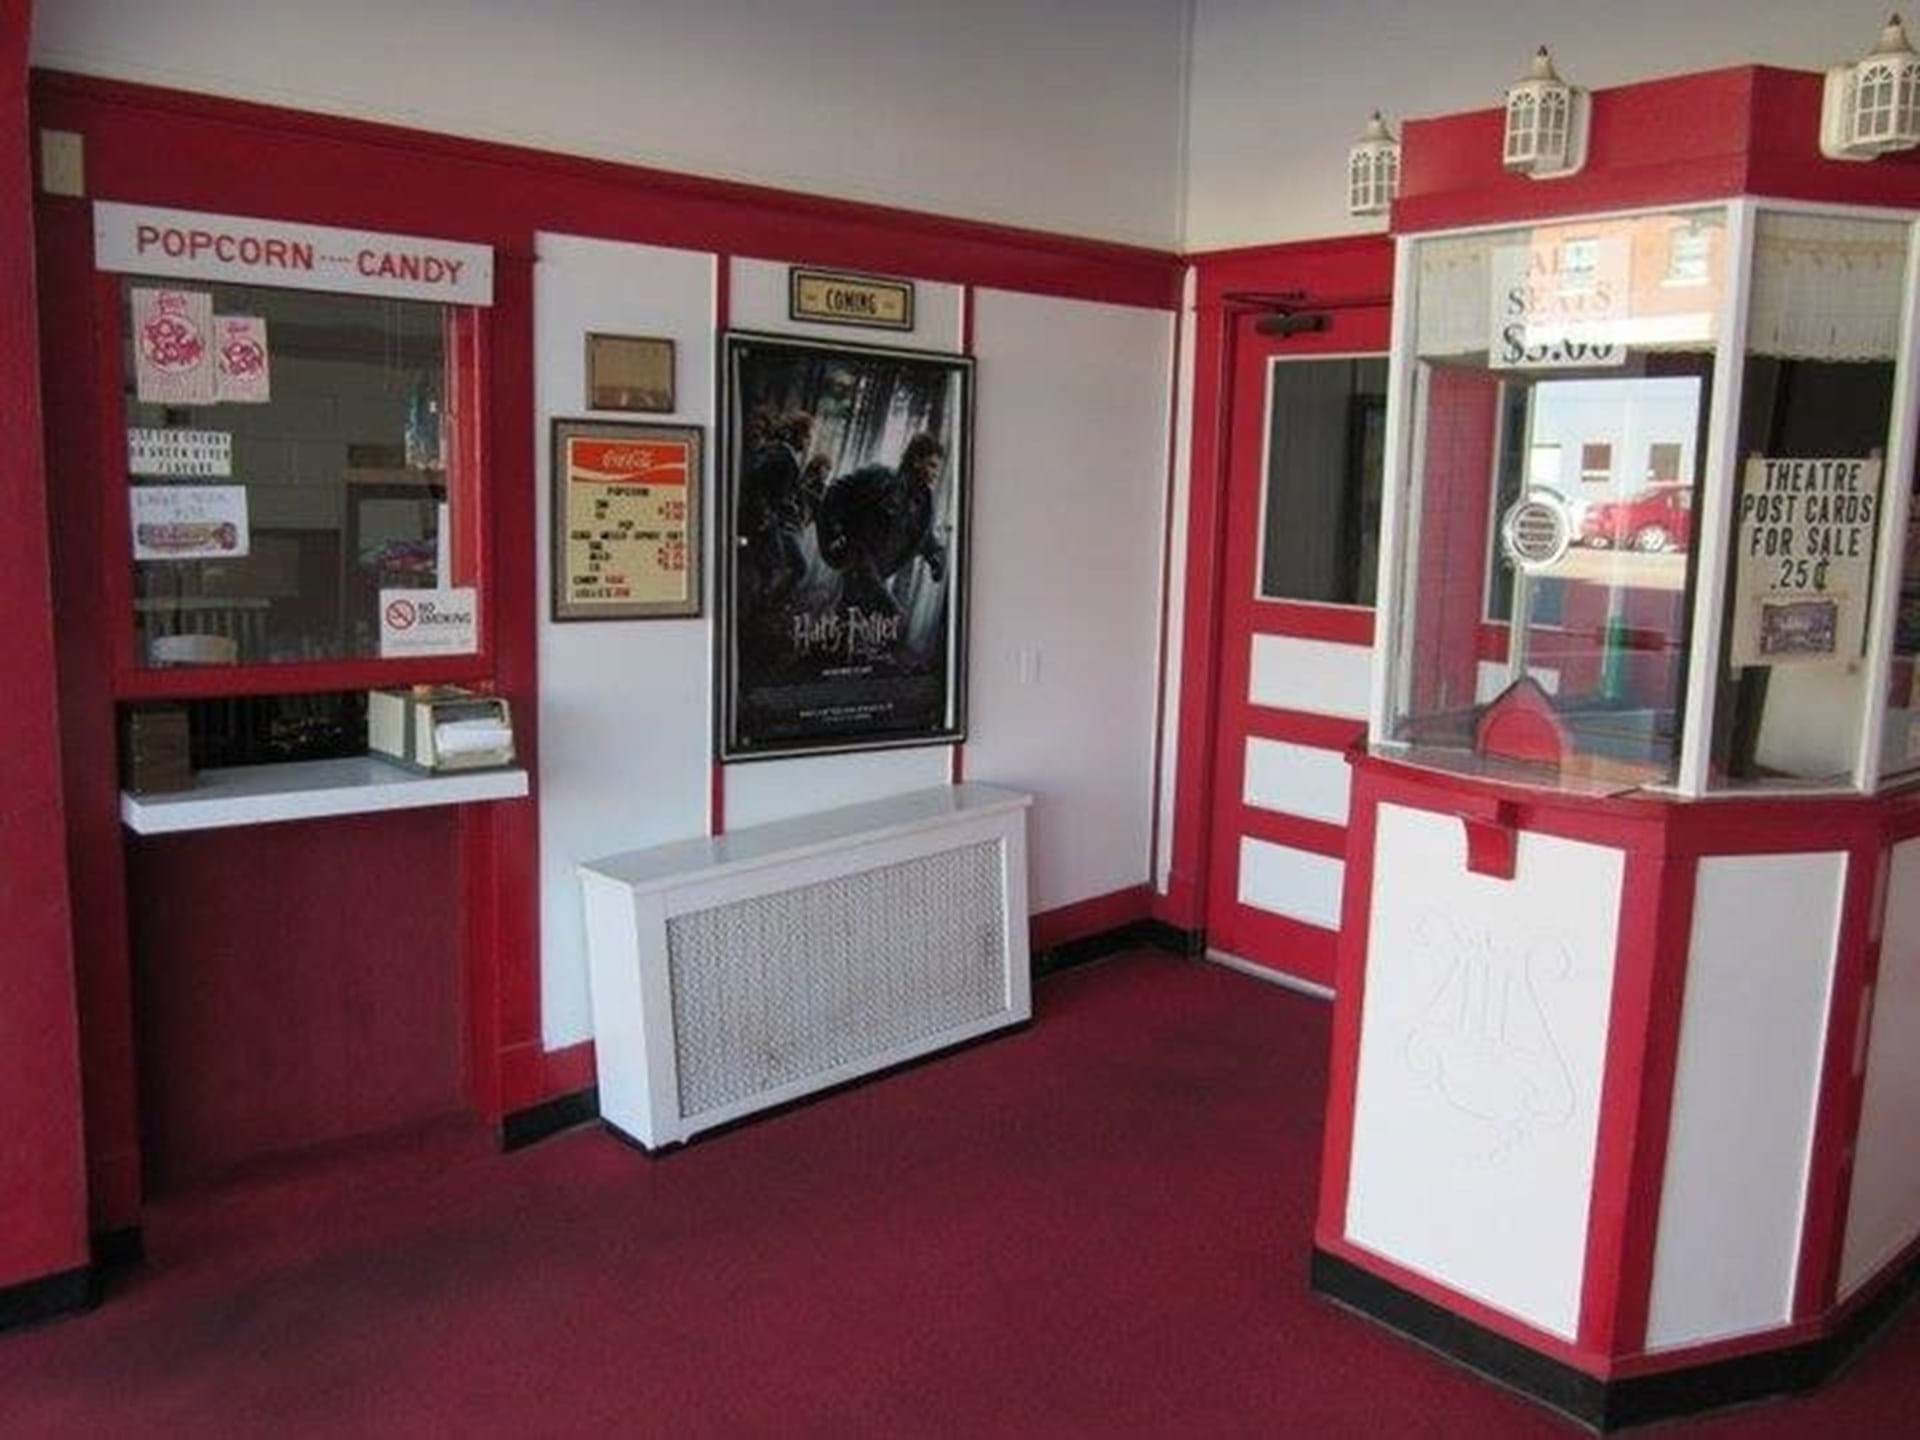 Outer Lobby and Boxoffice